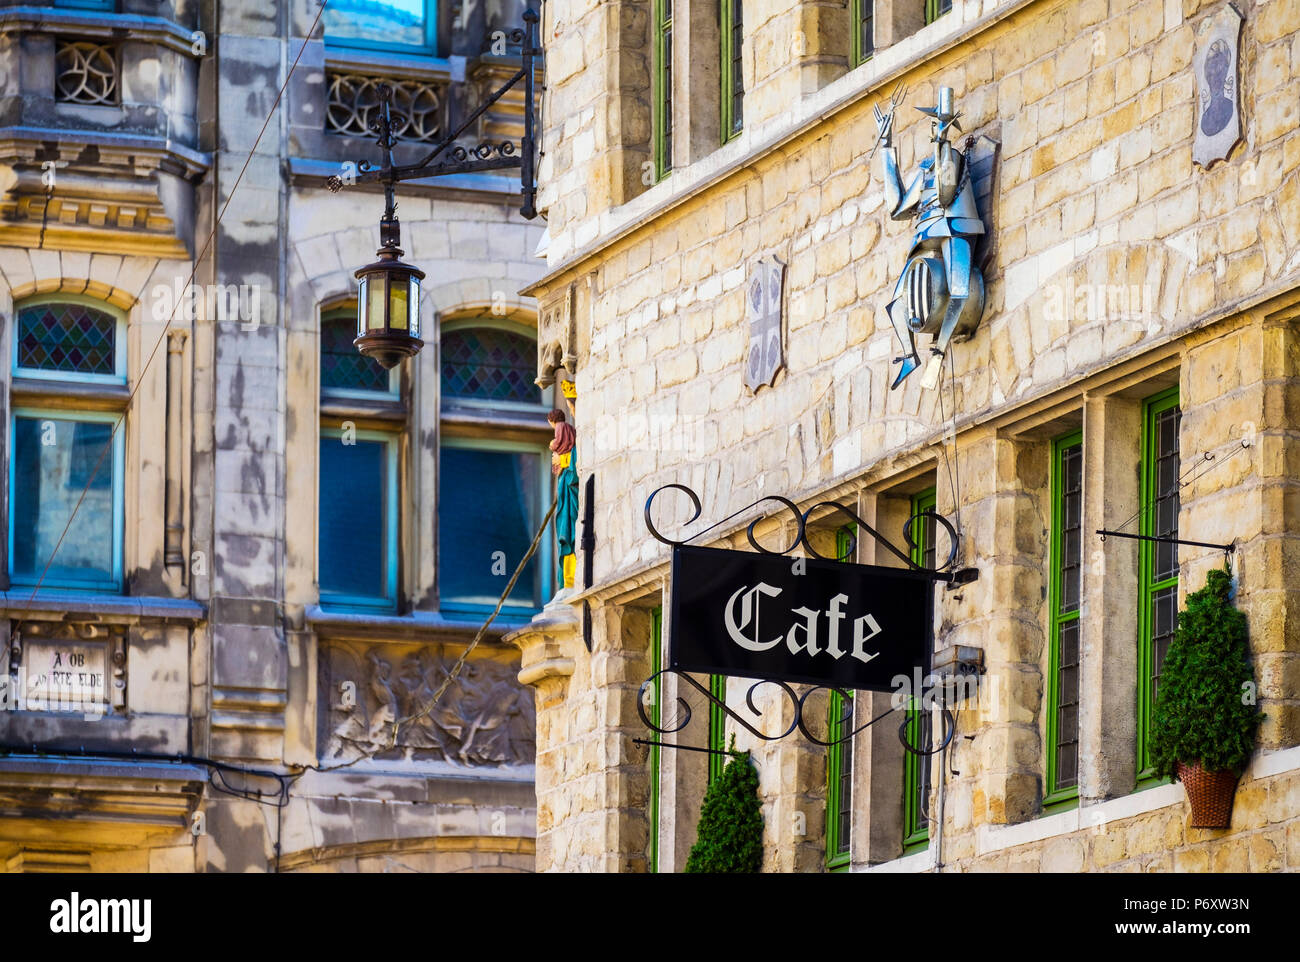 Belgium, Flanders, Ghent (Gent). Cafe sign and old buildings in central Ghent. Stock Photo